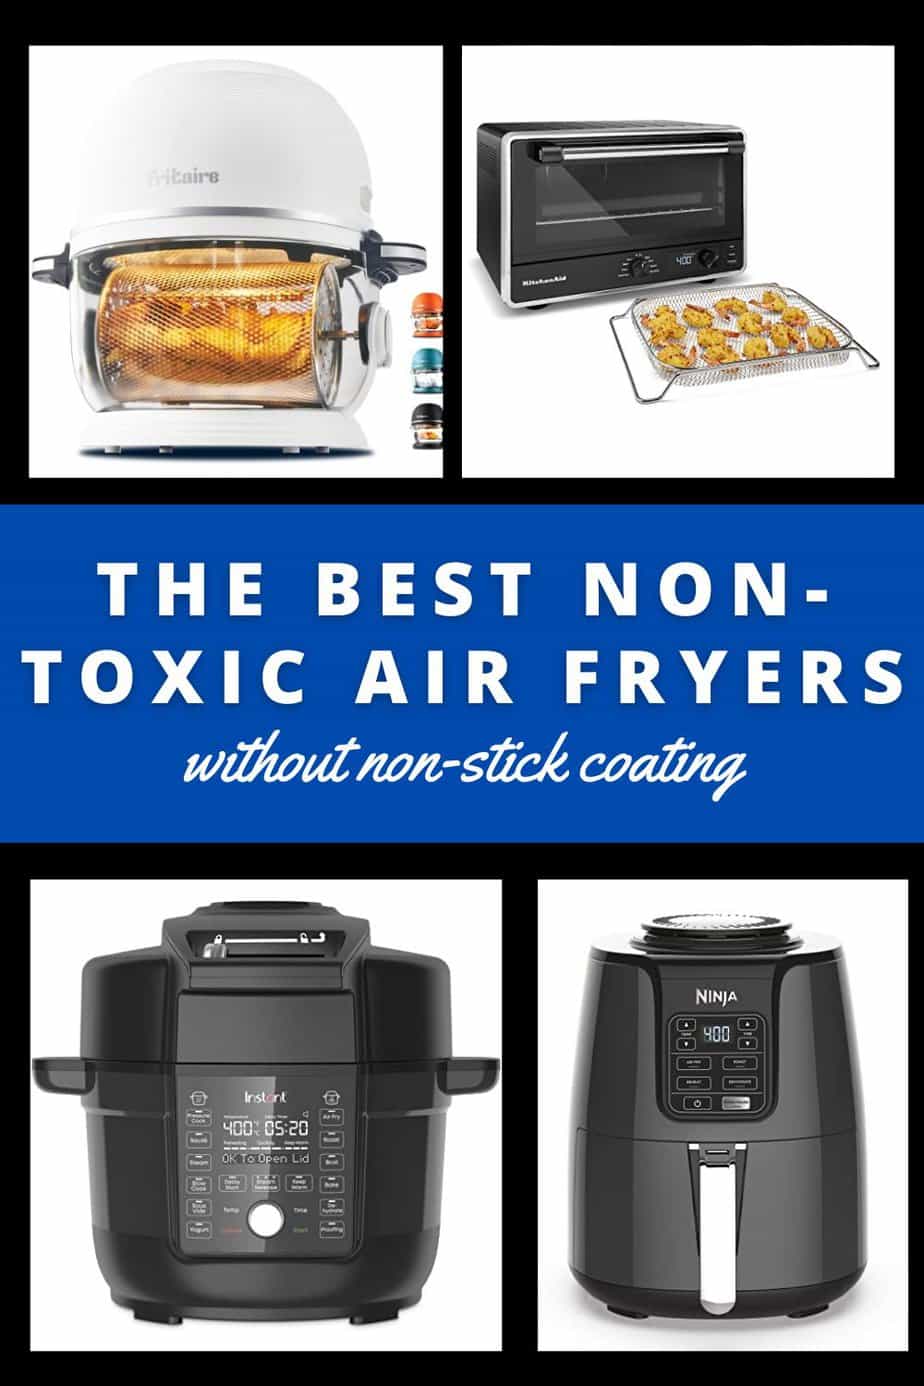 the best non-toxic air fryers without non-stick coating 